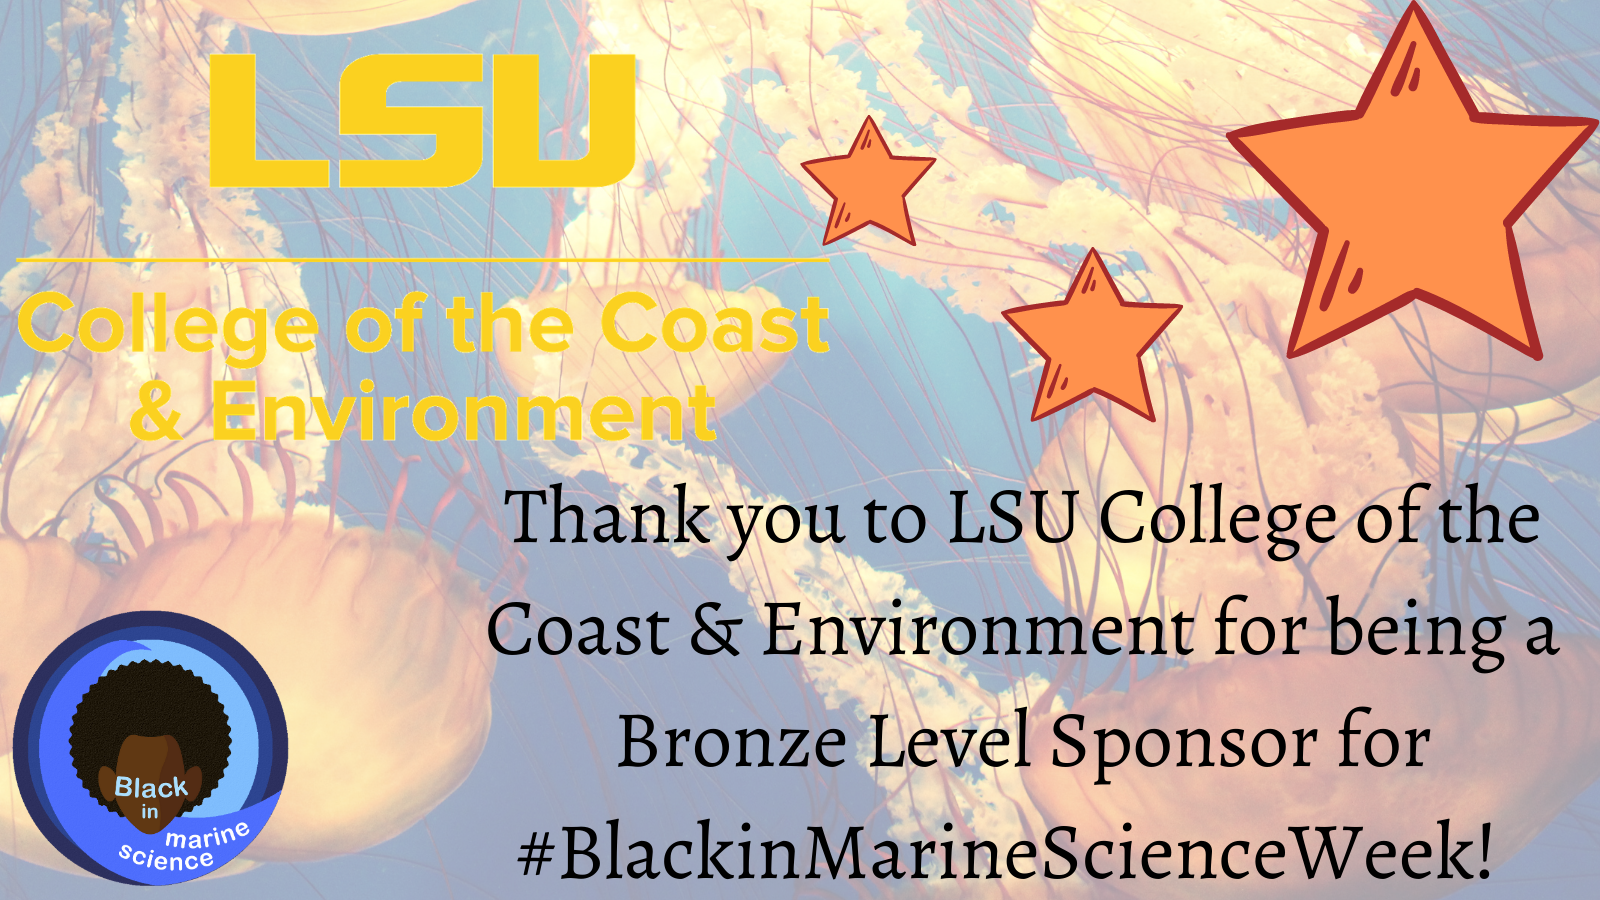 Thank you to Louisiana State University's College of the Coast & Environment for being a Bronze Level Sponsor for Black in Marine Science Week